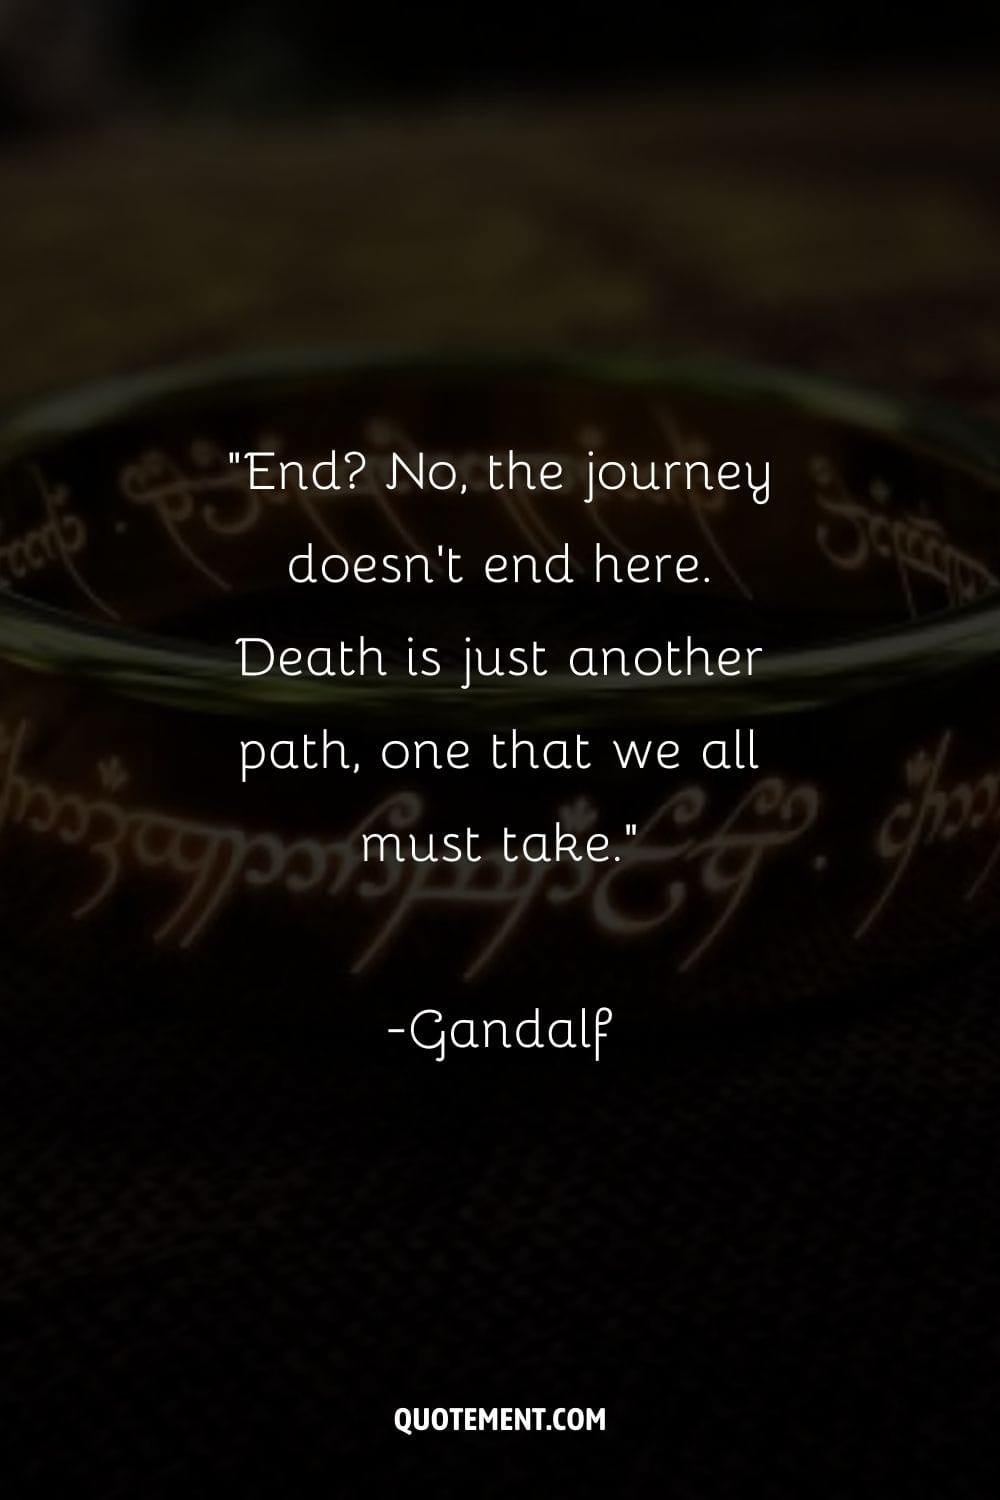 End No, the journey doesn’t end here. Death is just another path, one that we all must take.